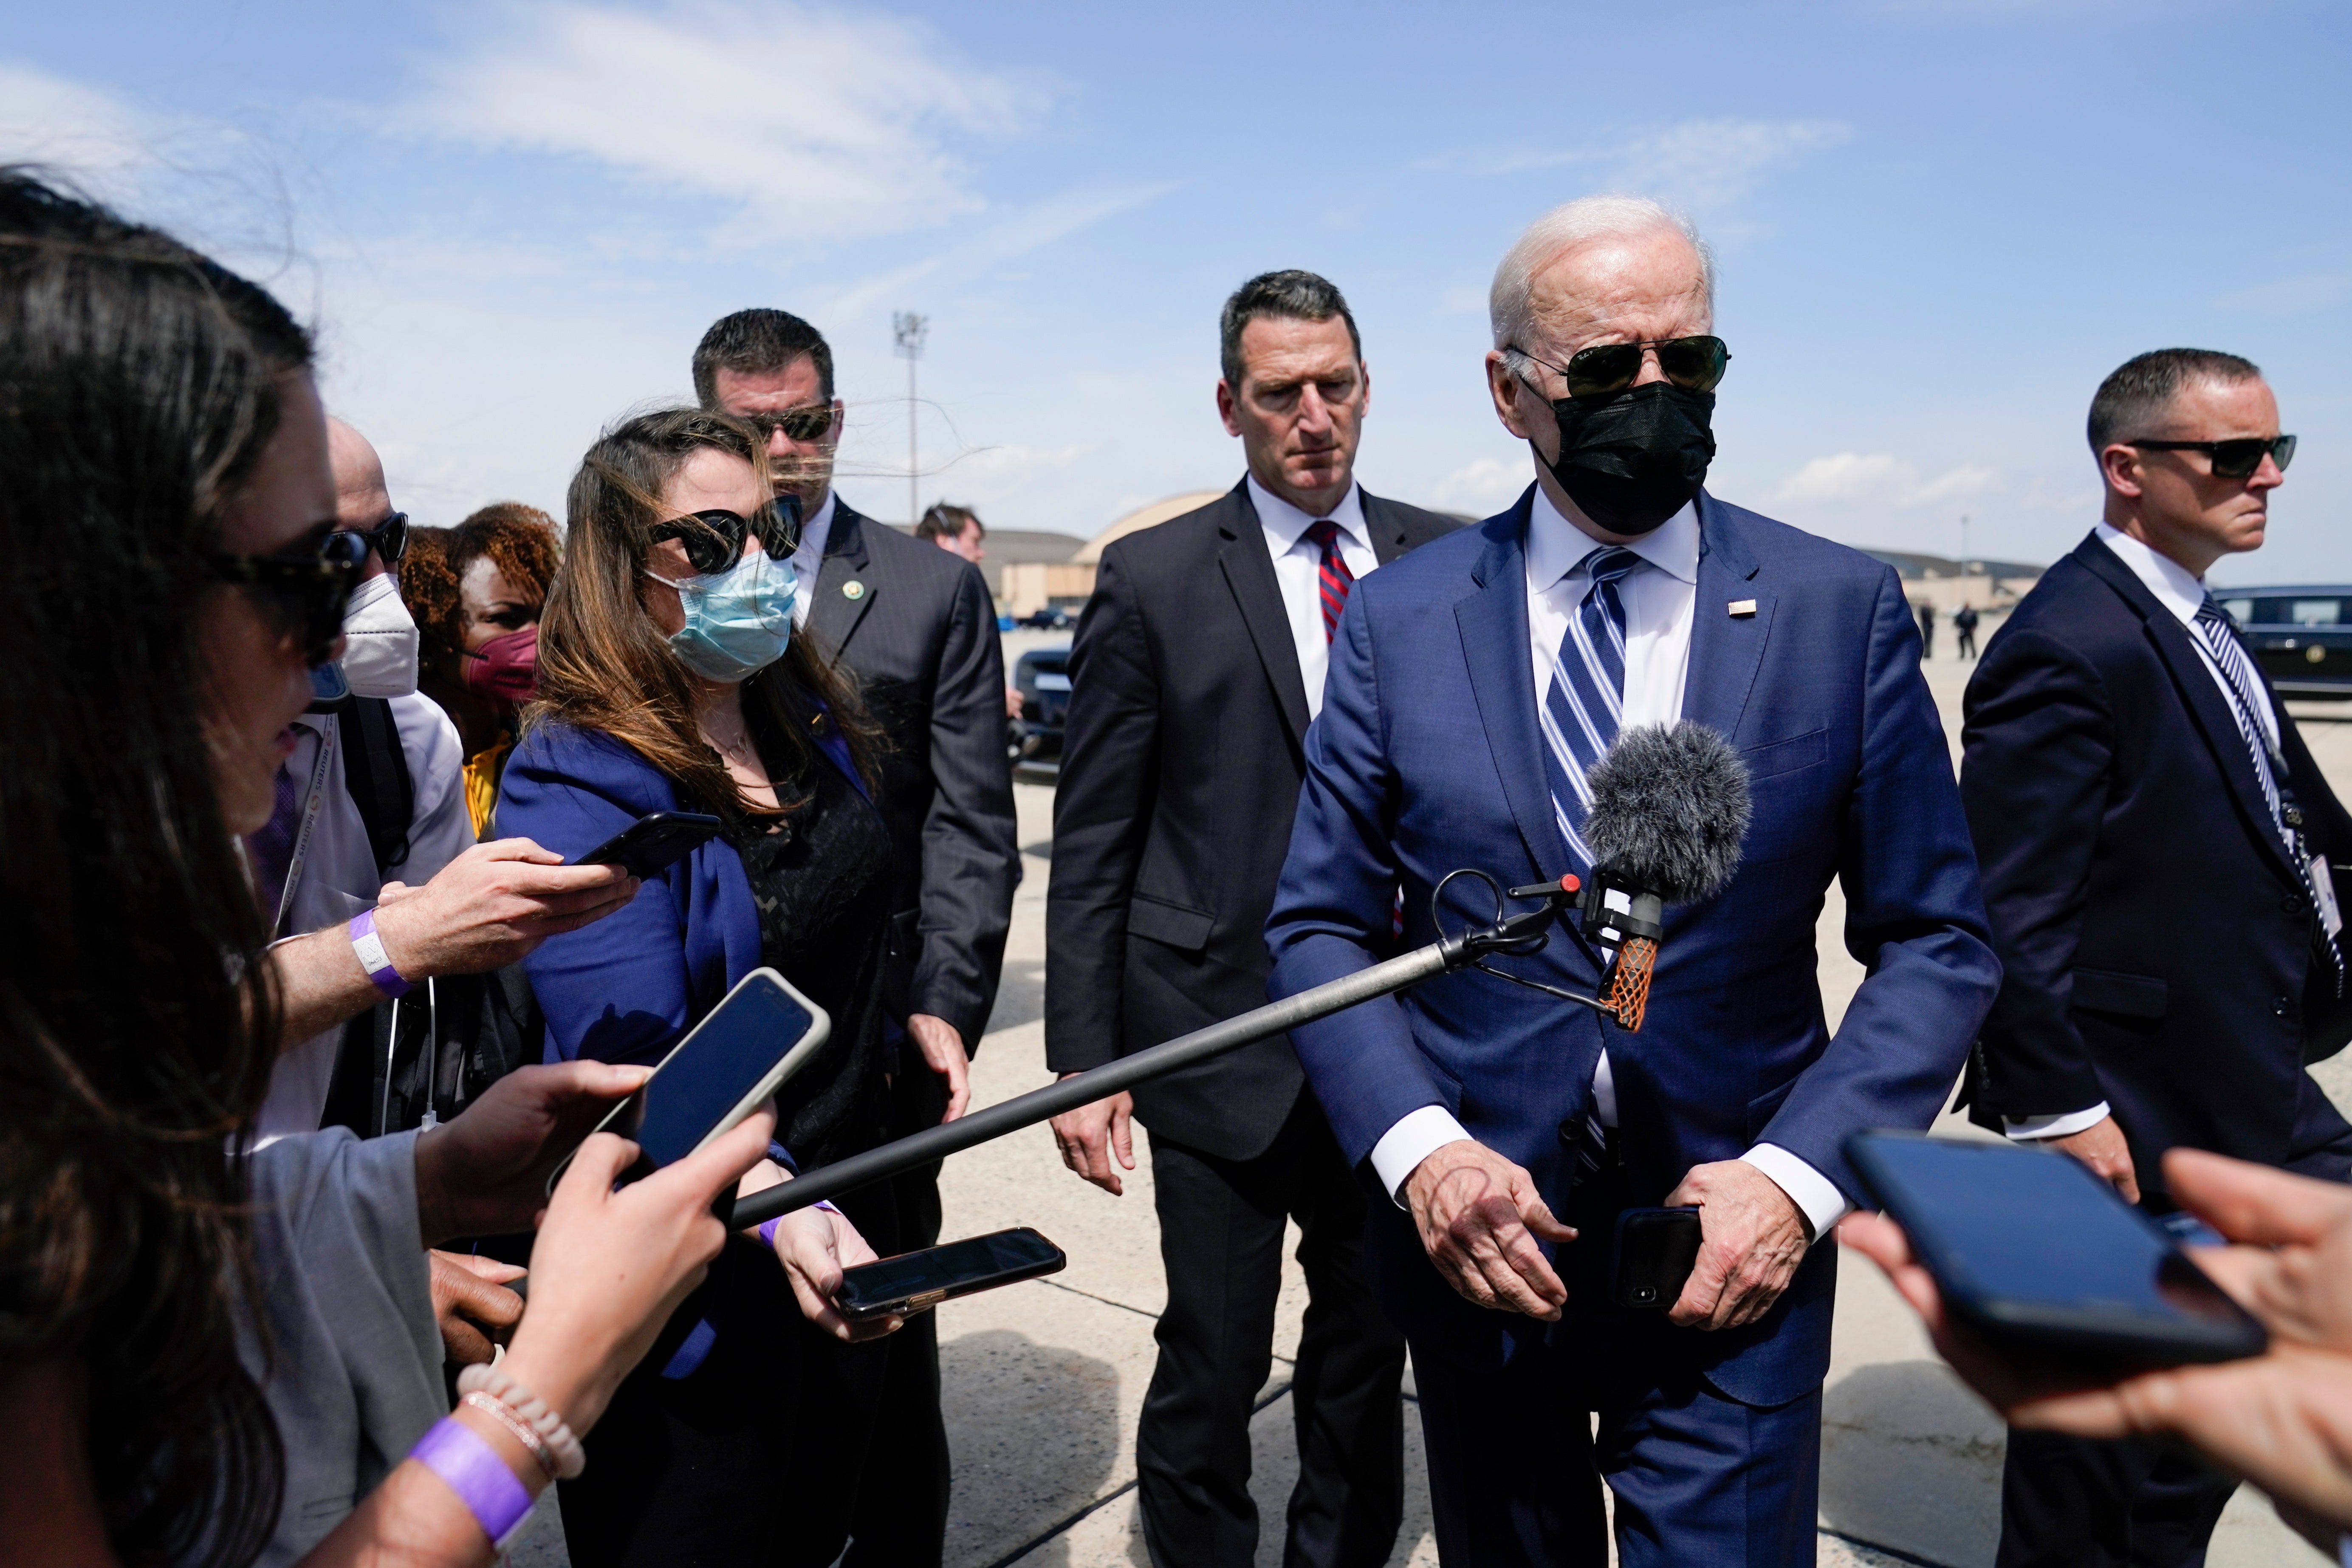 President Joe Biden speaks to members of the media before boarding Air Force One at Andrews Air Force Base, Md., en route to North Carolina Agricultural and Technical State University, in Greensboro, N.C., Thursday, April 14, 2022. (AP Photo/Carolyn Kaster)